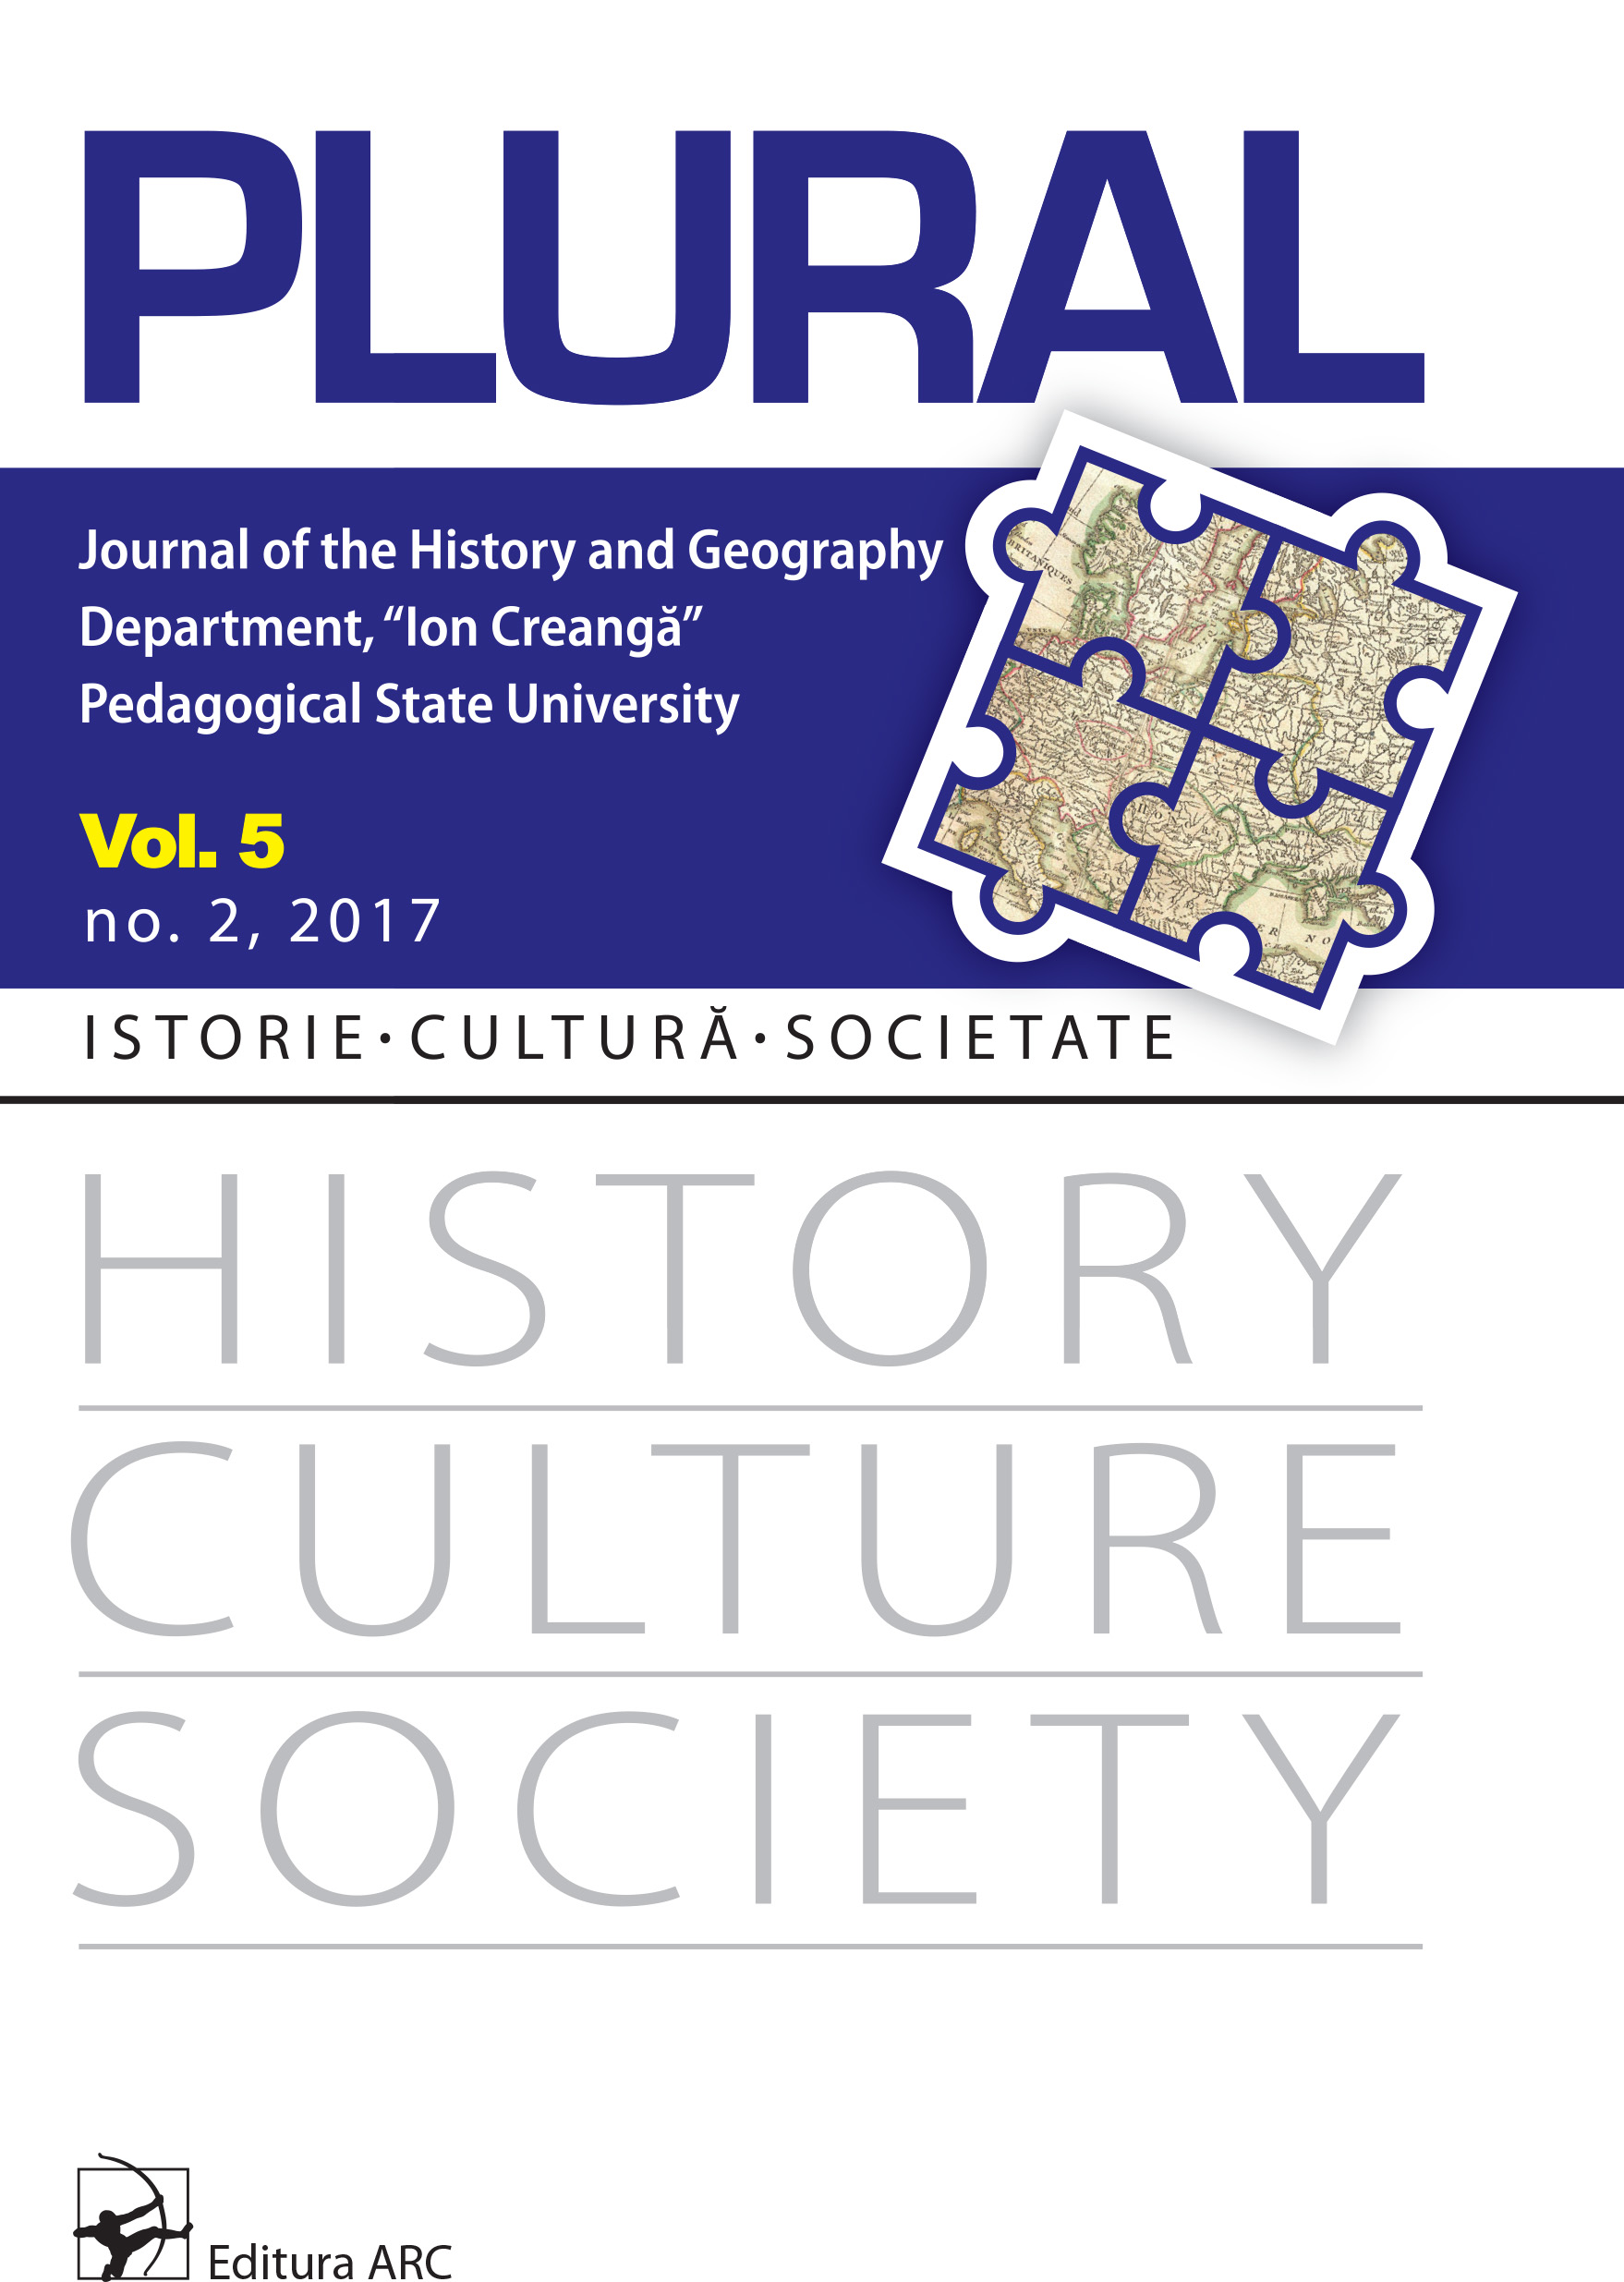 Pottery found at the Horodca Mică and Ulmu Iron Age settlements – results of archaeoceramological analysis Cover Image